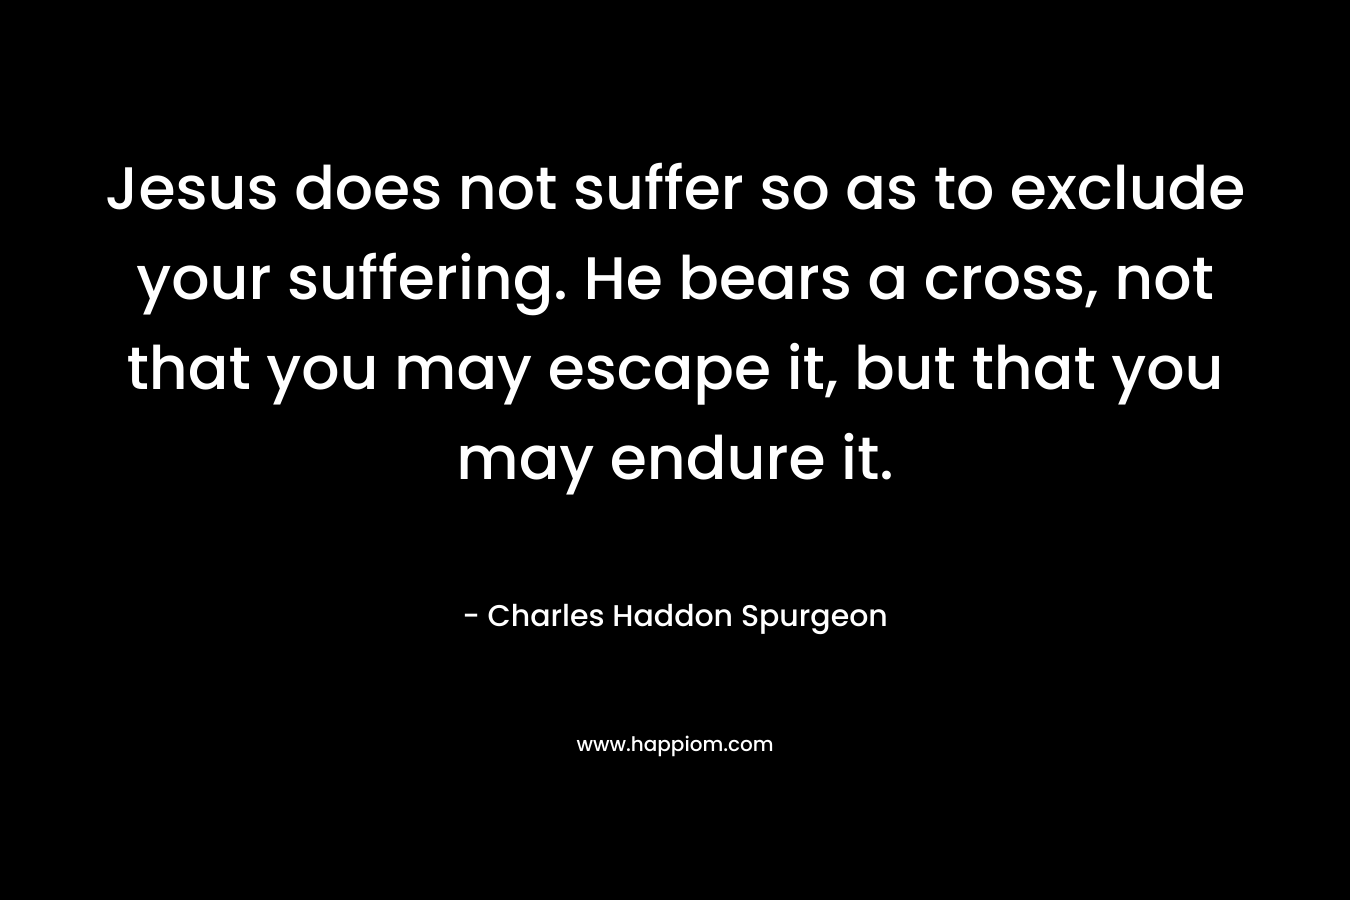 Jesus does not suffer so as to exclude your suffering. He bears a cross, not that you may escape it, but that you may endure it. – Charles Haddon Spurgeon